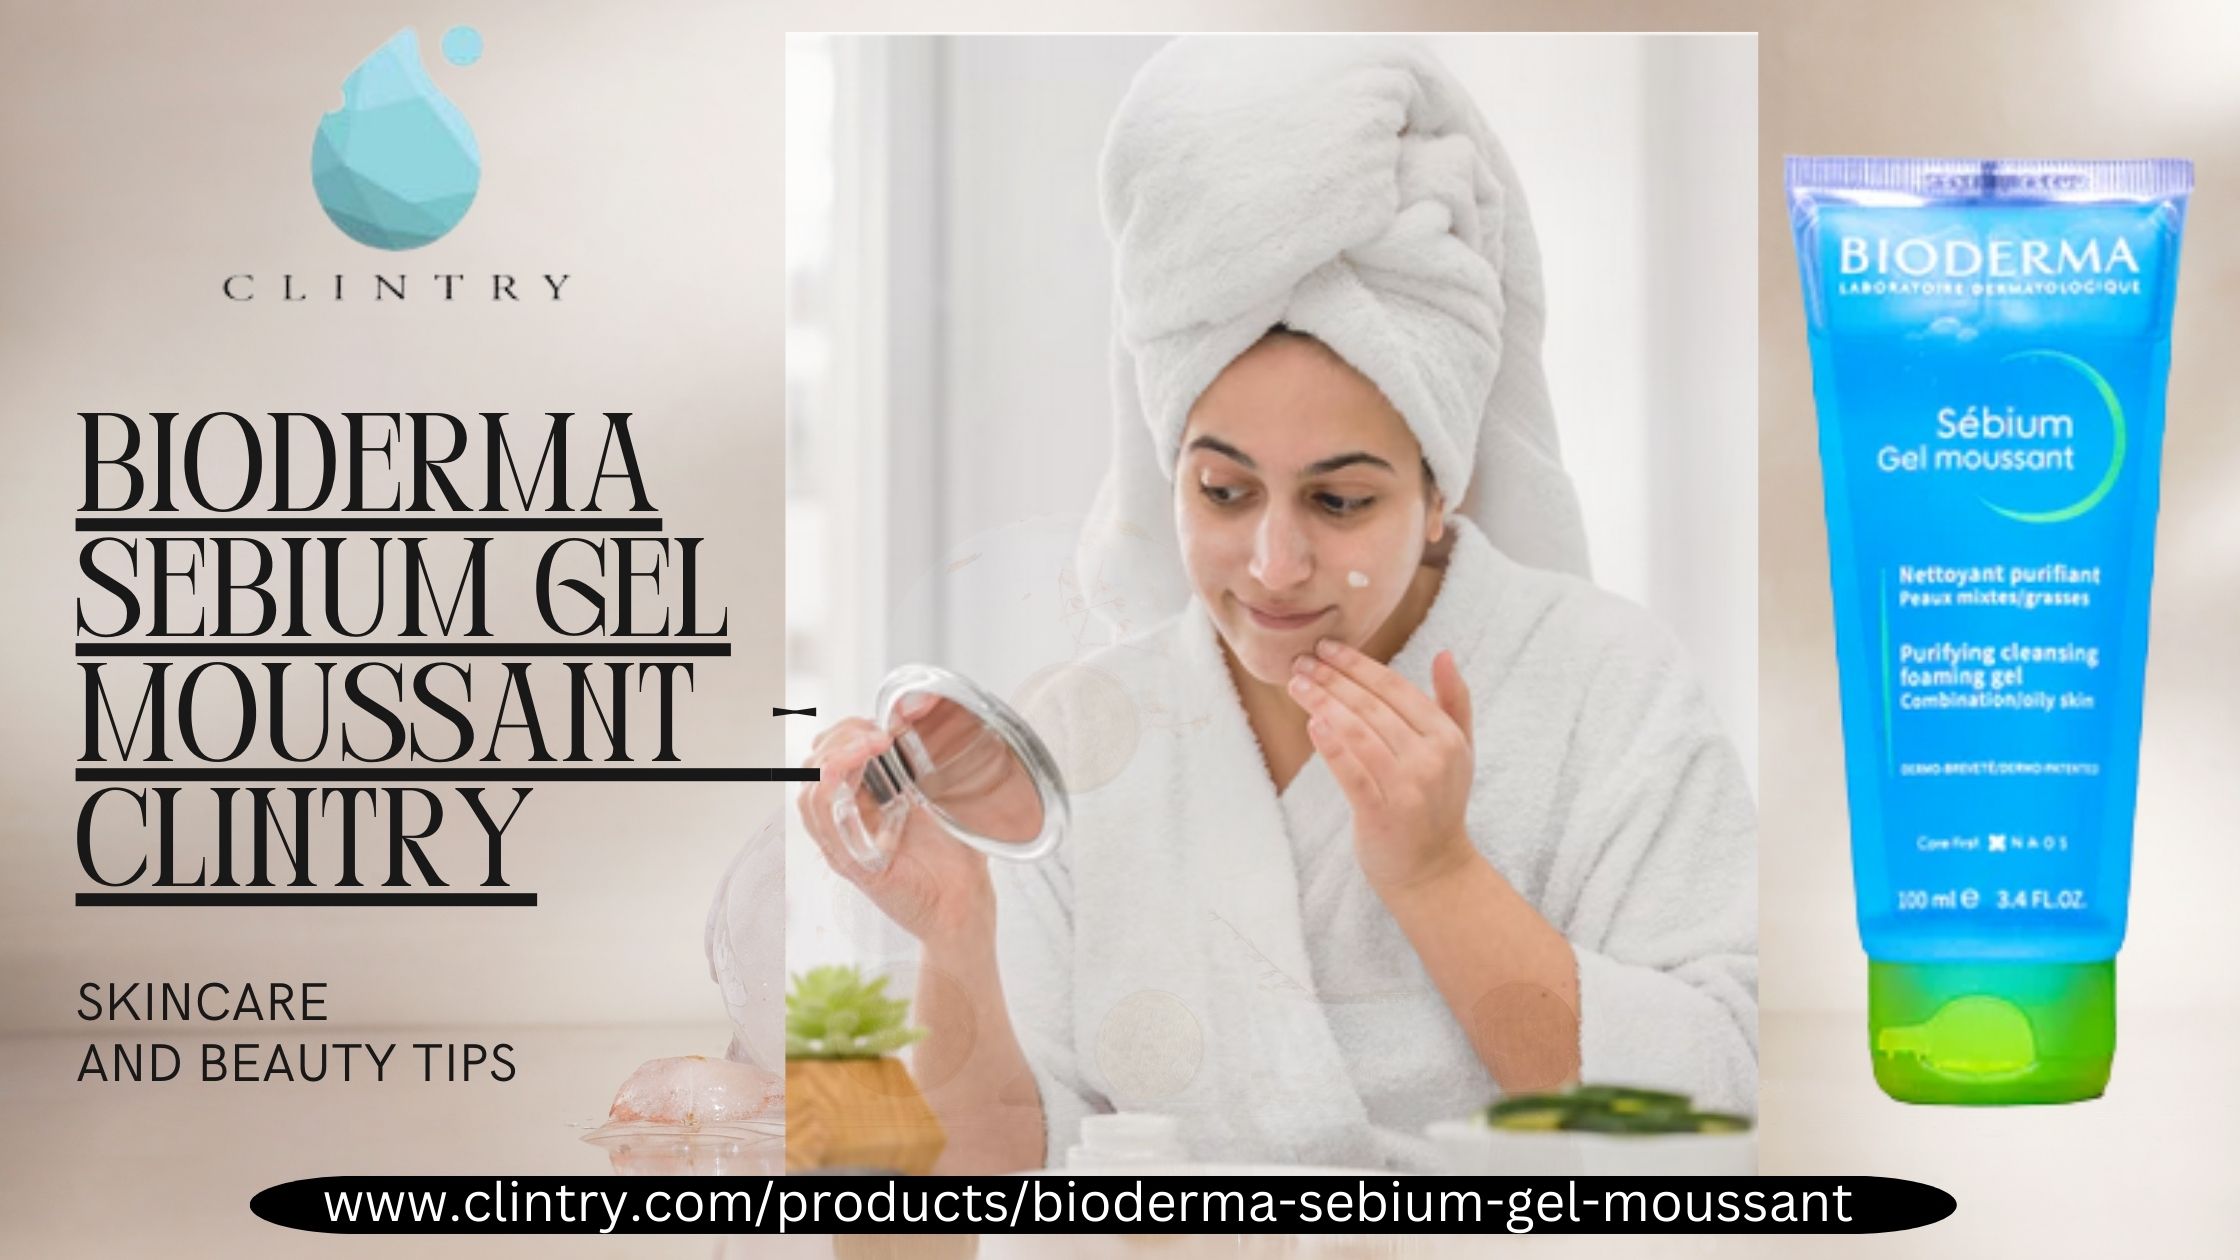 What is Bioderma Sebium Gel Moussant and Night Peel used for?